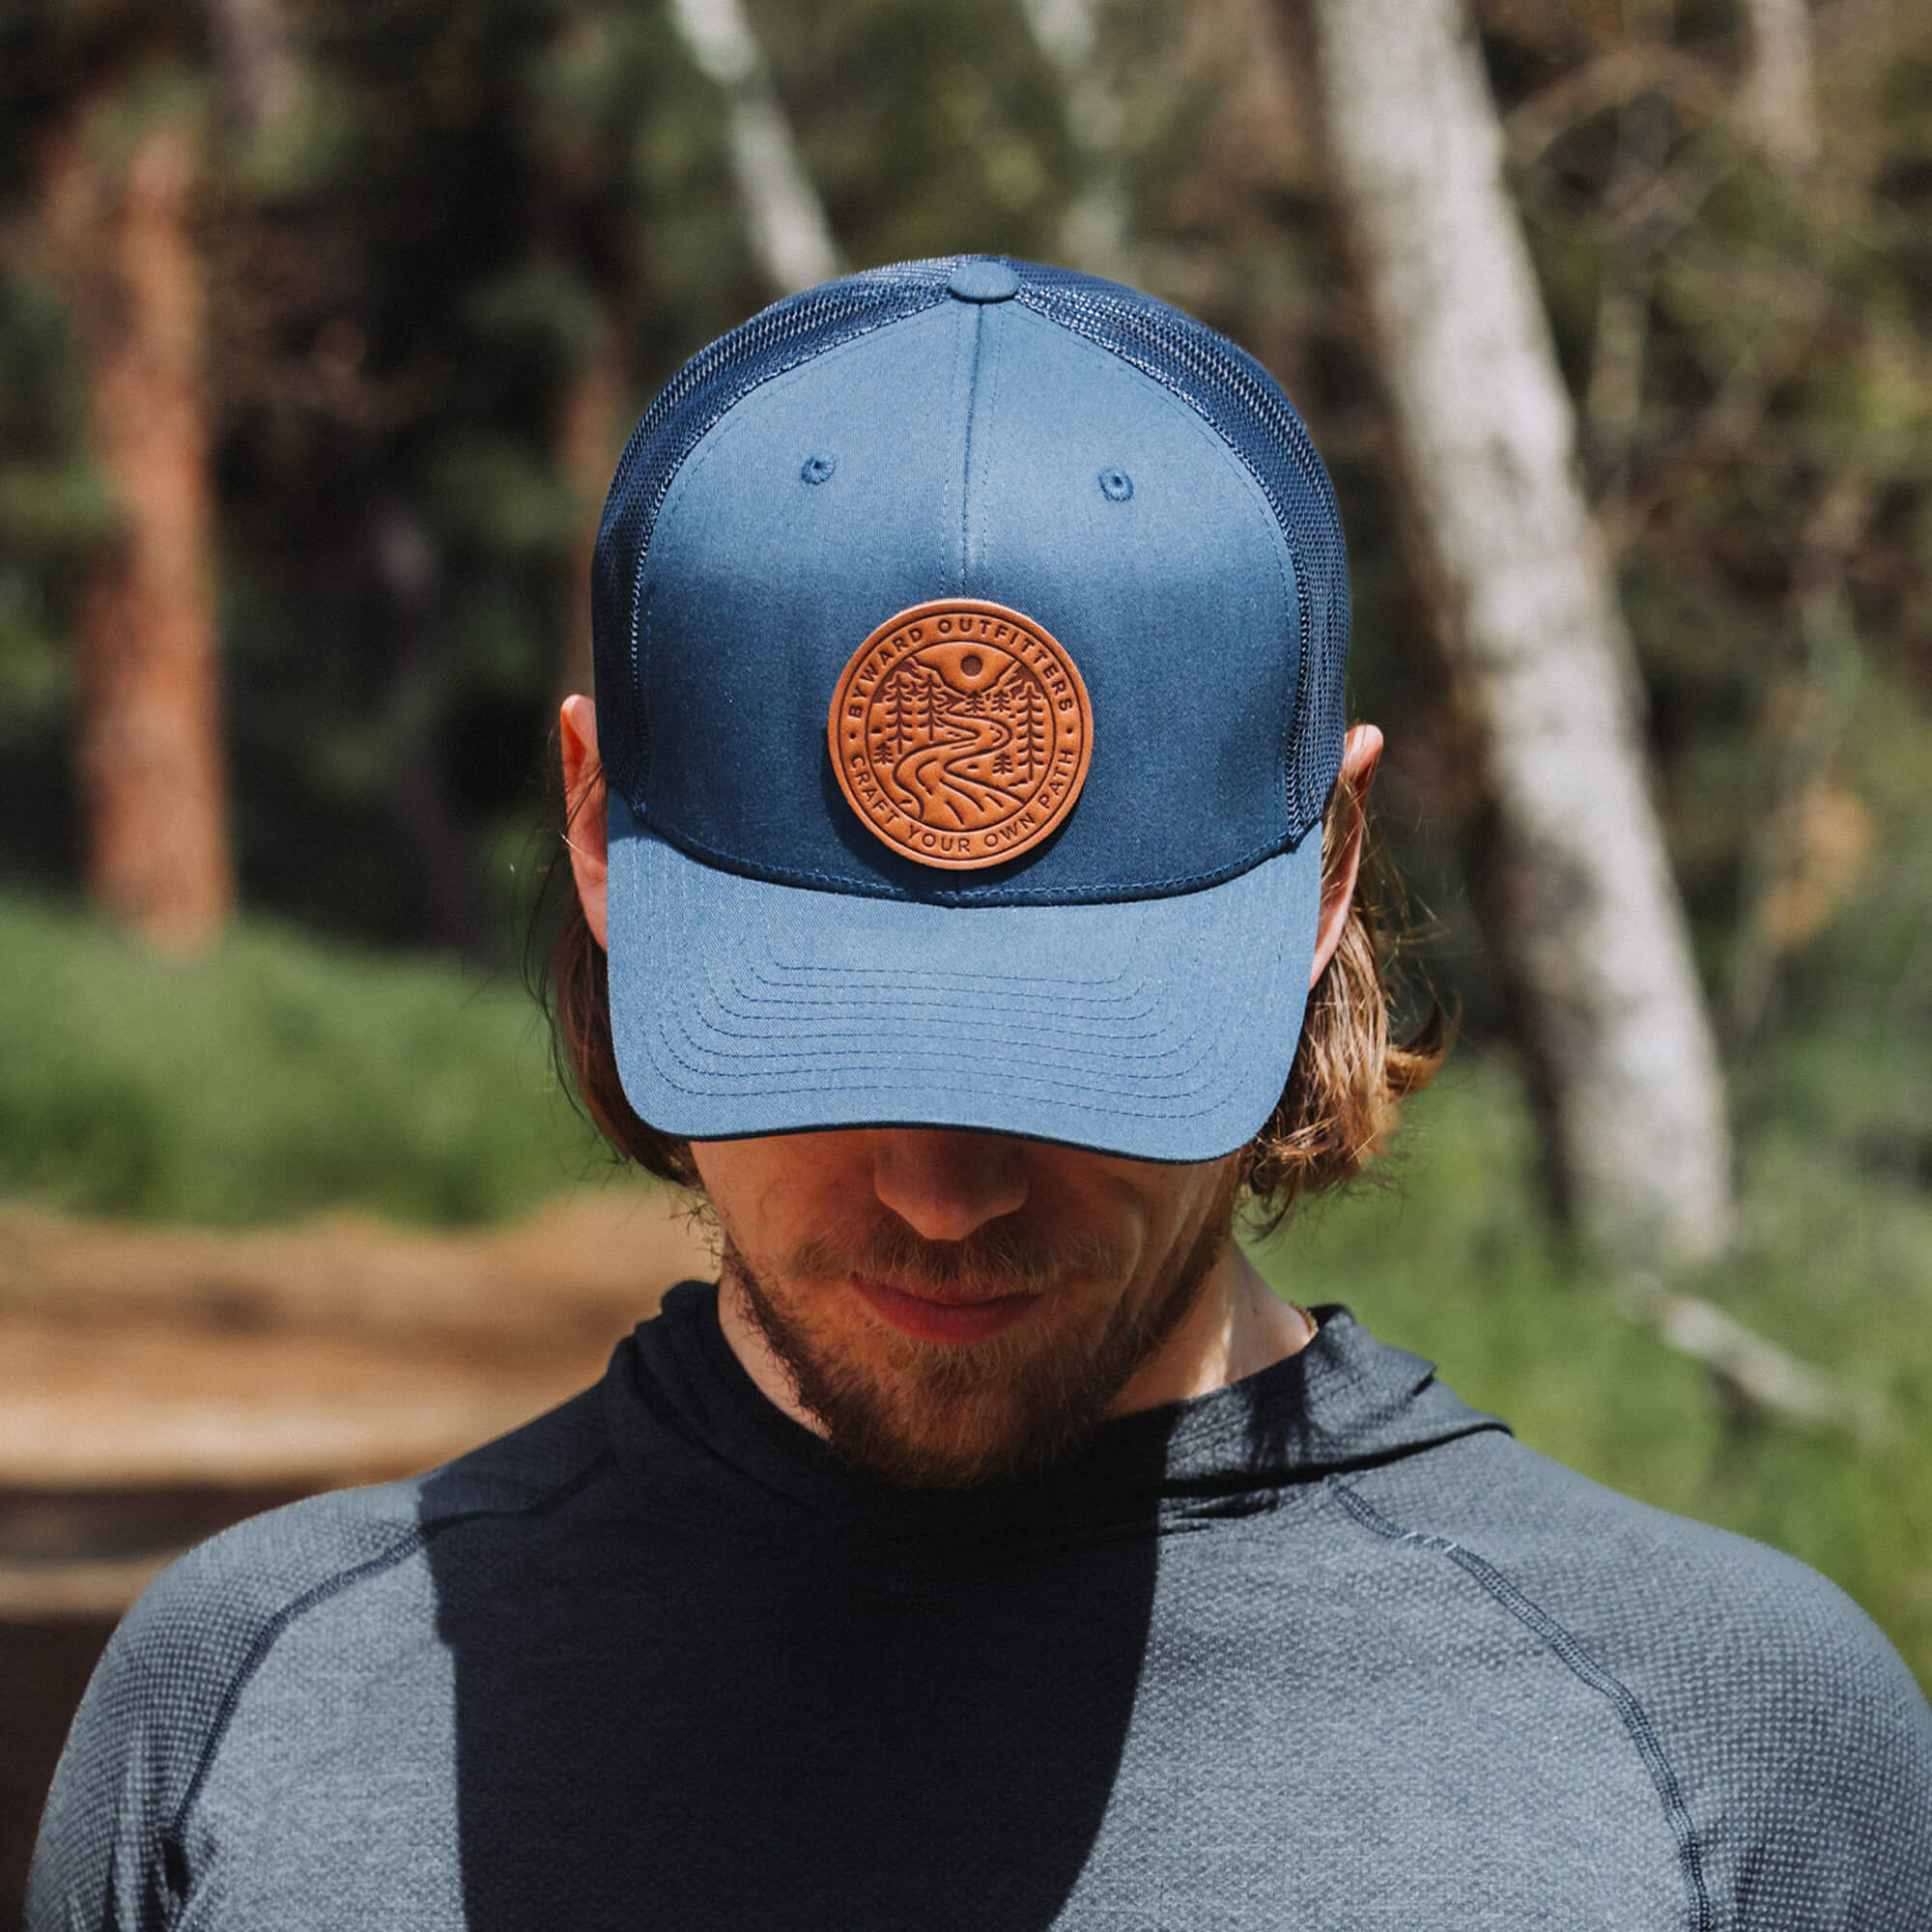 Navy trucker hat with full-grain leather patch of Winding Wilderness | BLACK-005-004, CHARC-005-004, NAVY-005-004, HGREY-005-004, MOSS-005-004, BROWN-005-004